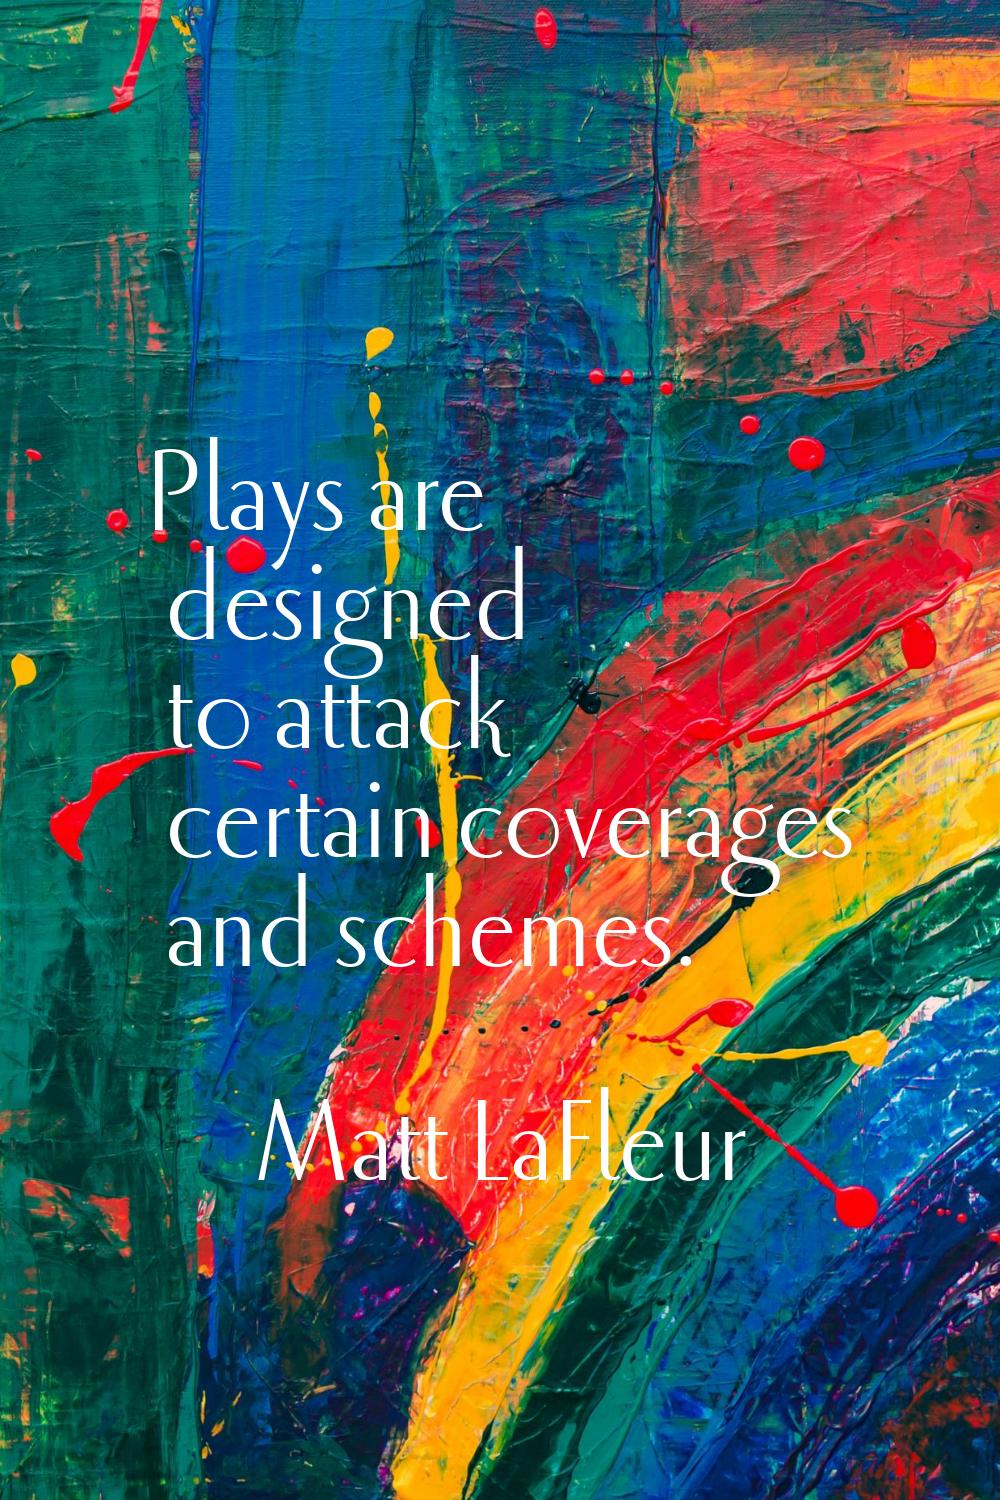 Plays are designed to attack certain coverages and schemes.